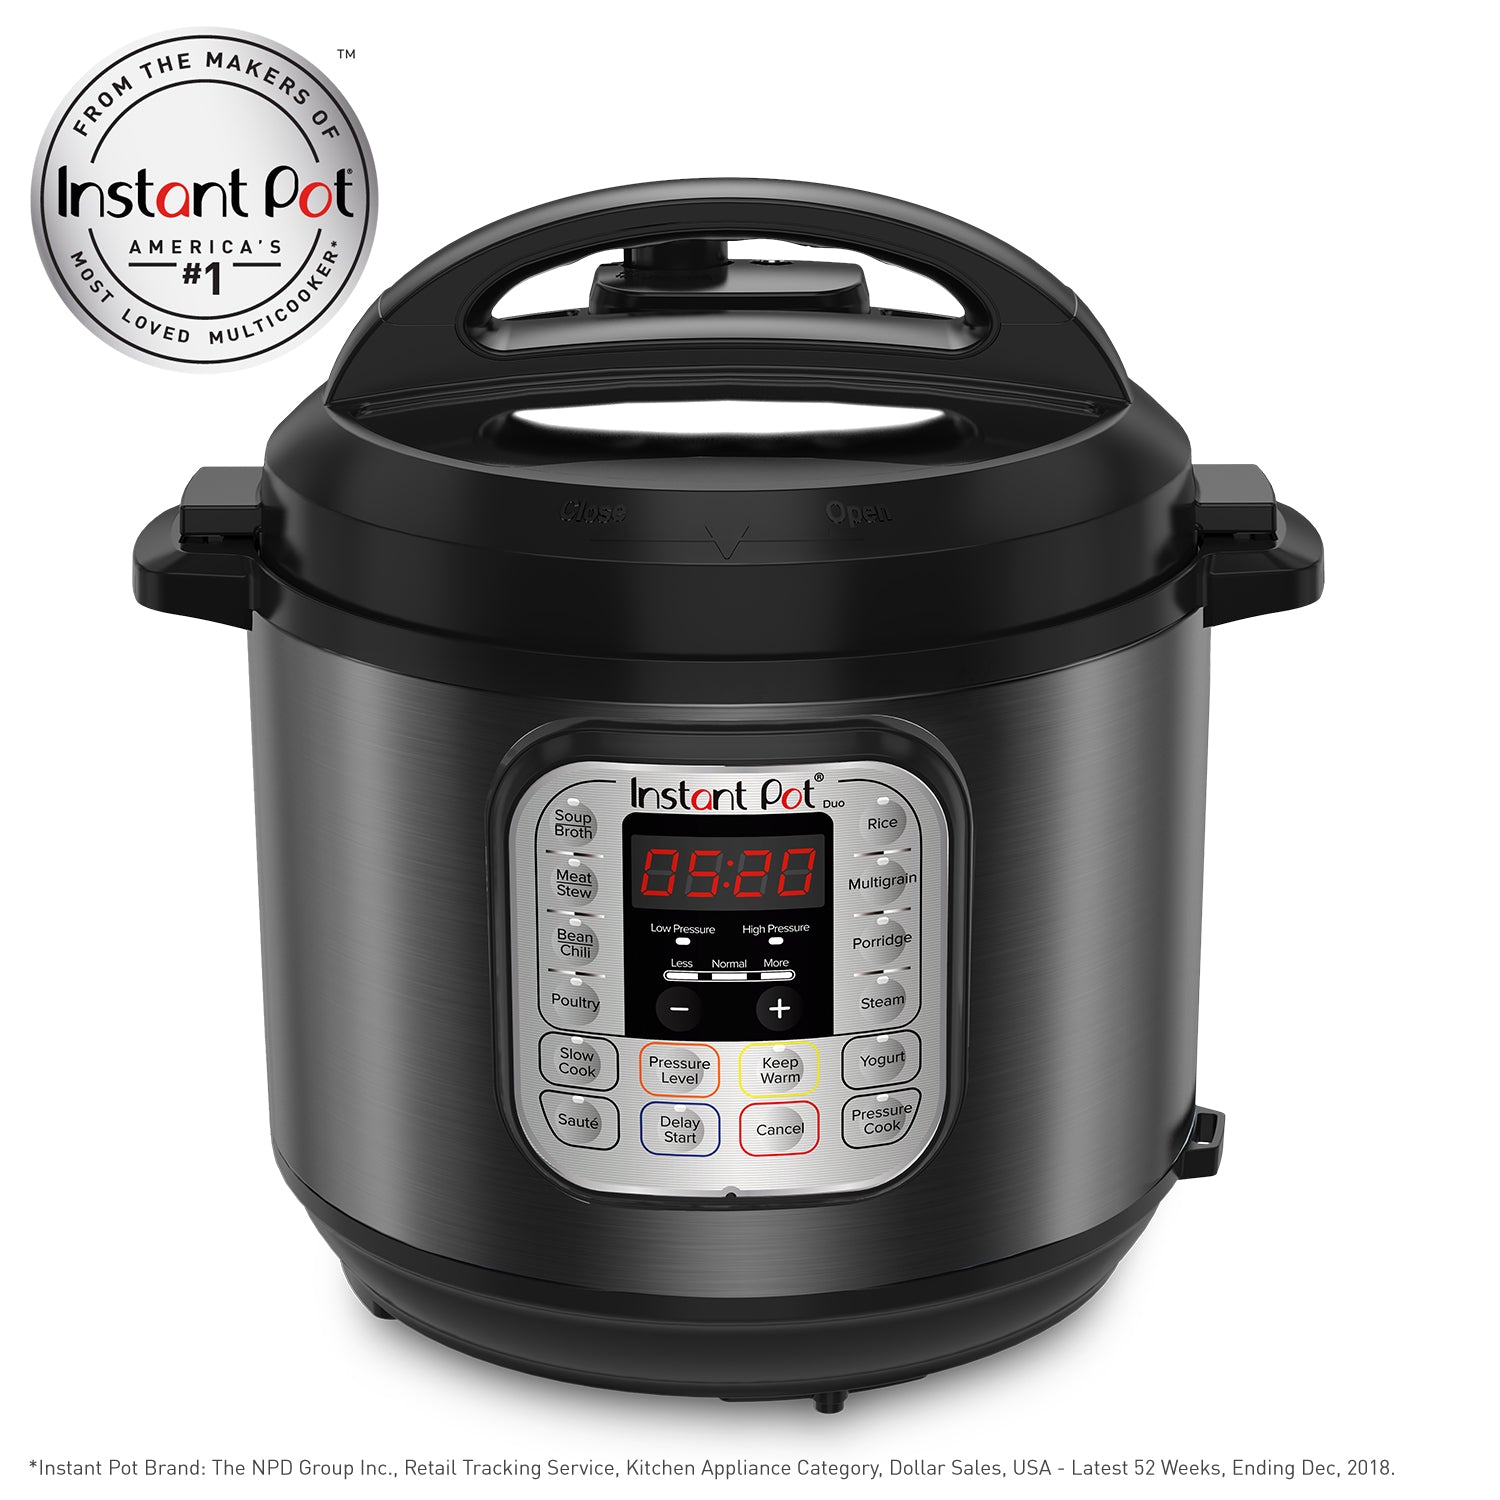 Instant Pot Duo 7-in-1 Electric Pressure Cooker, Slow Cooker, Rice Cooker, Steamer, Saute, Yogurt Maker, and Warmer, 6 Quart, Black, 14 One-Touch Programs